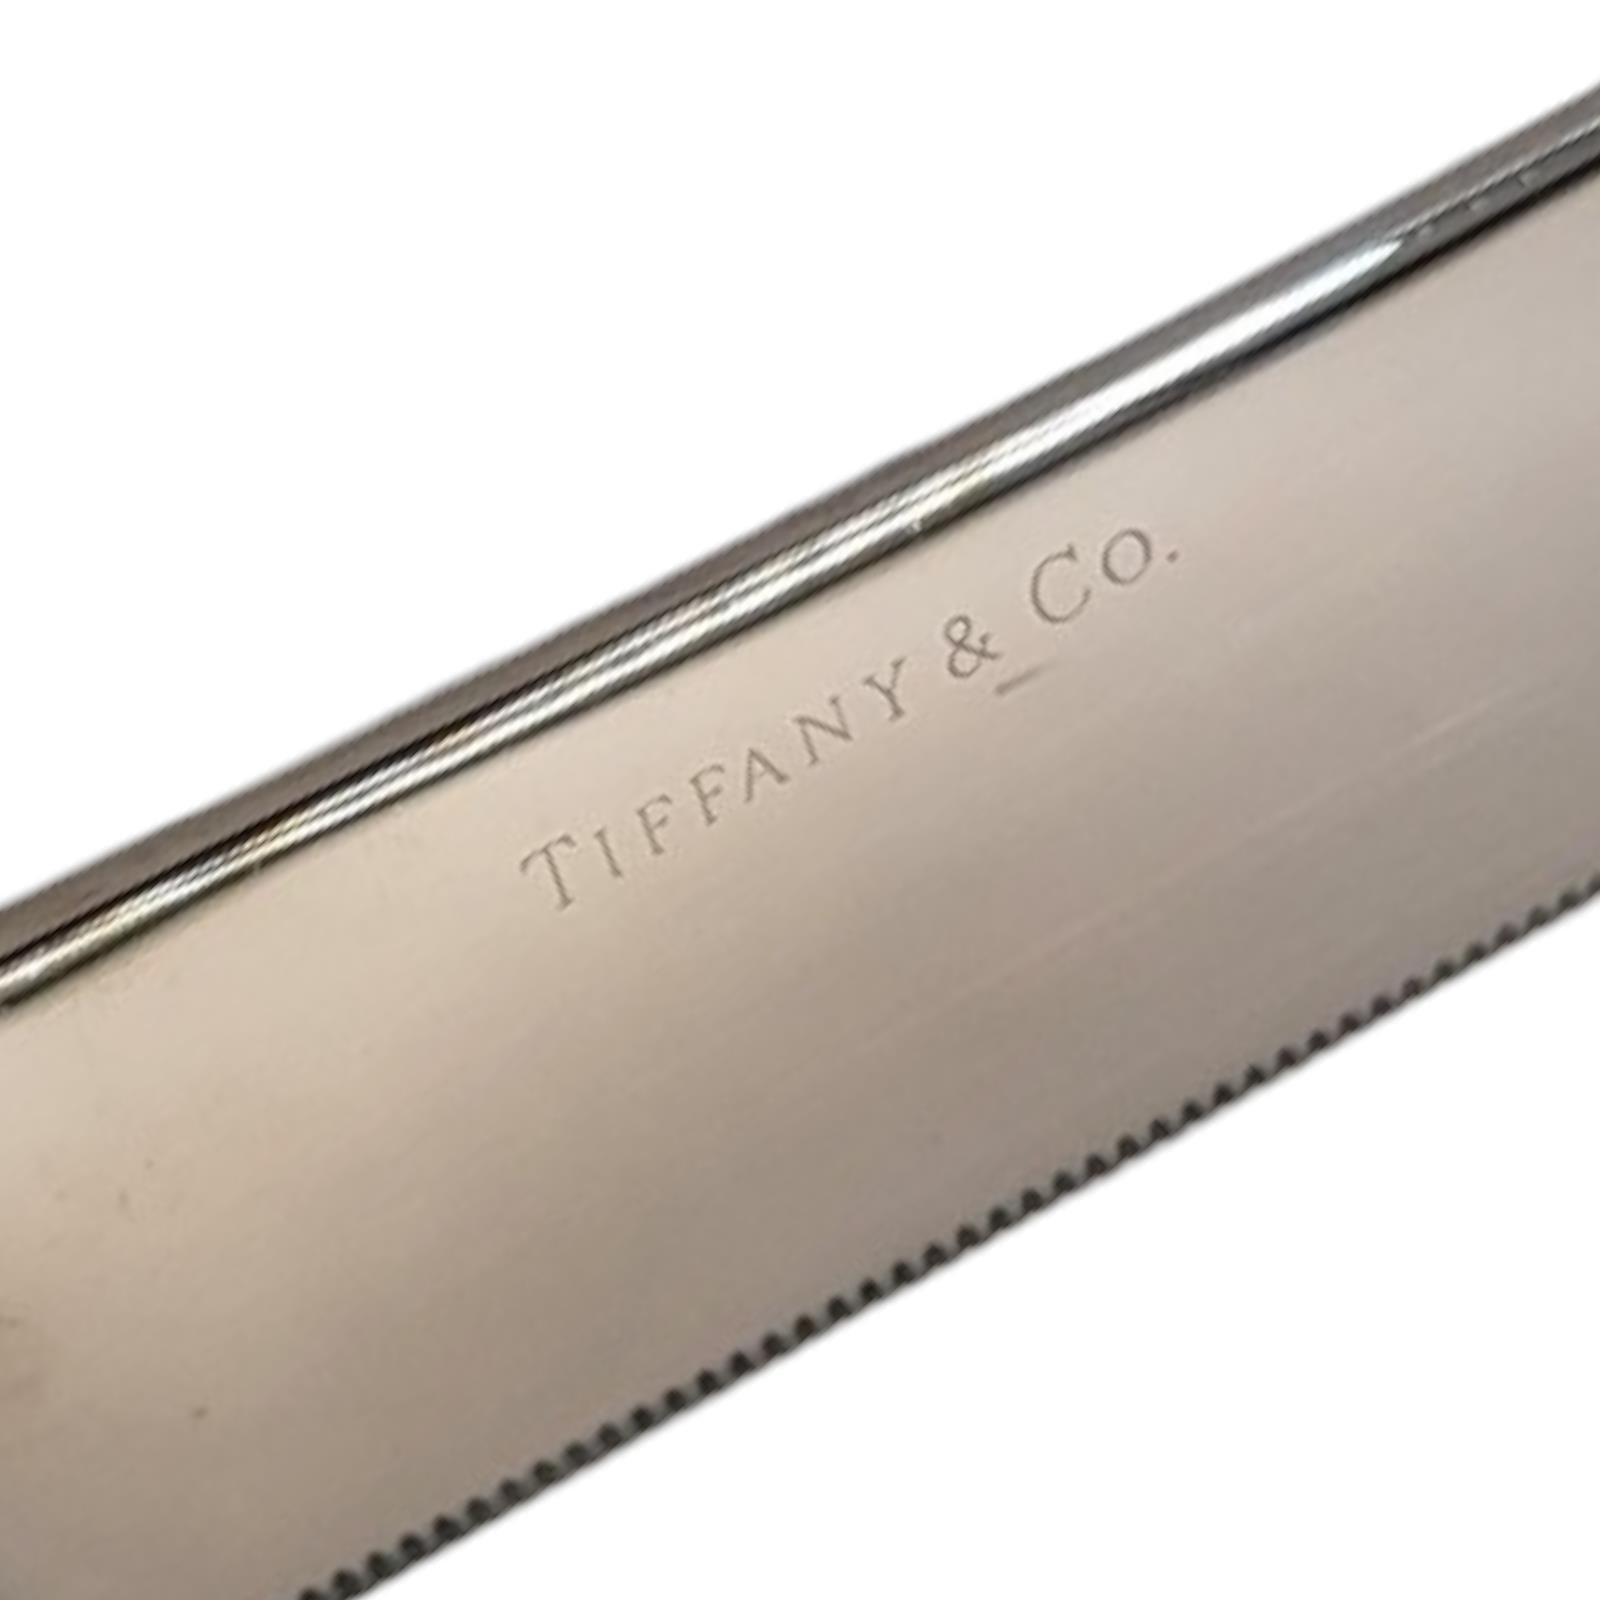 TIFFANY AND CO., A STERLING SILVER HANDLED WEDDING CAKE KNIFE Wheatsheaf design to handle and - Image 3 of 5